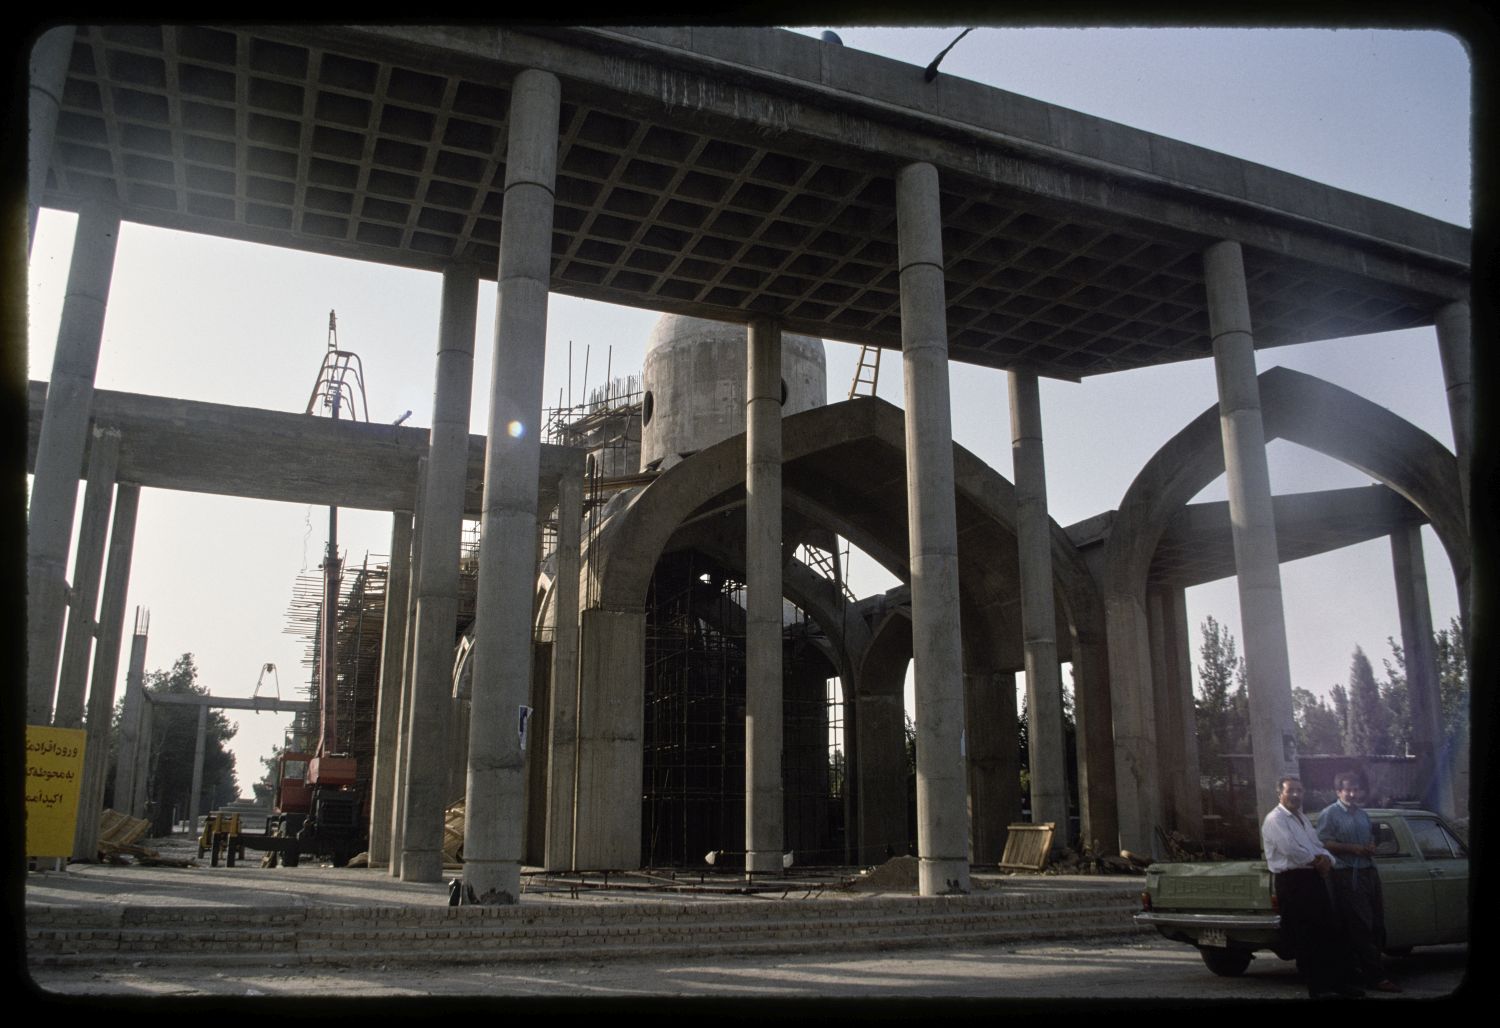 View of monument under construction.